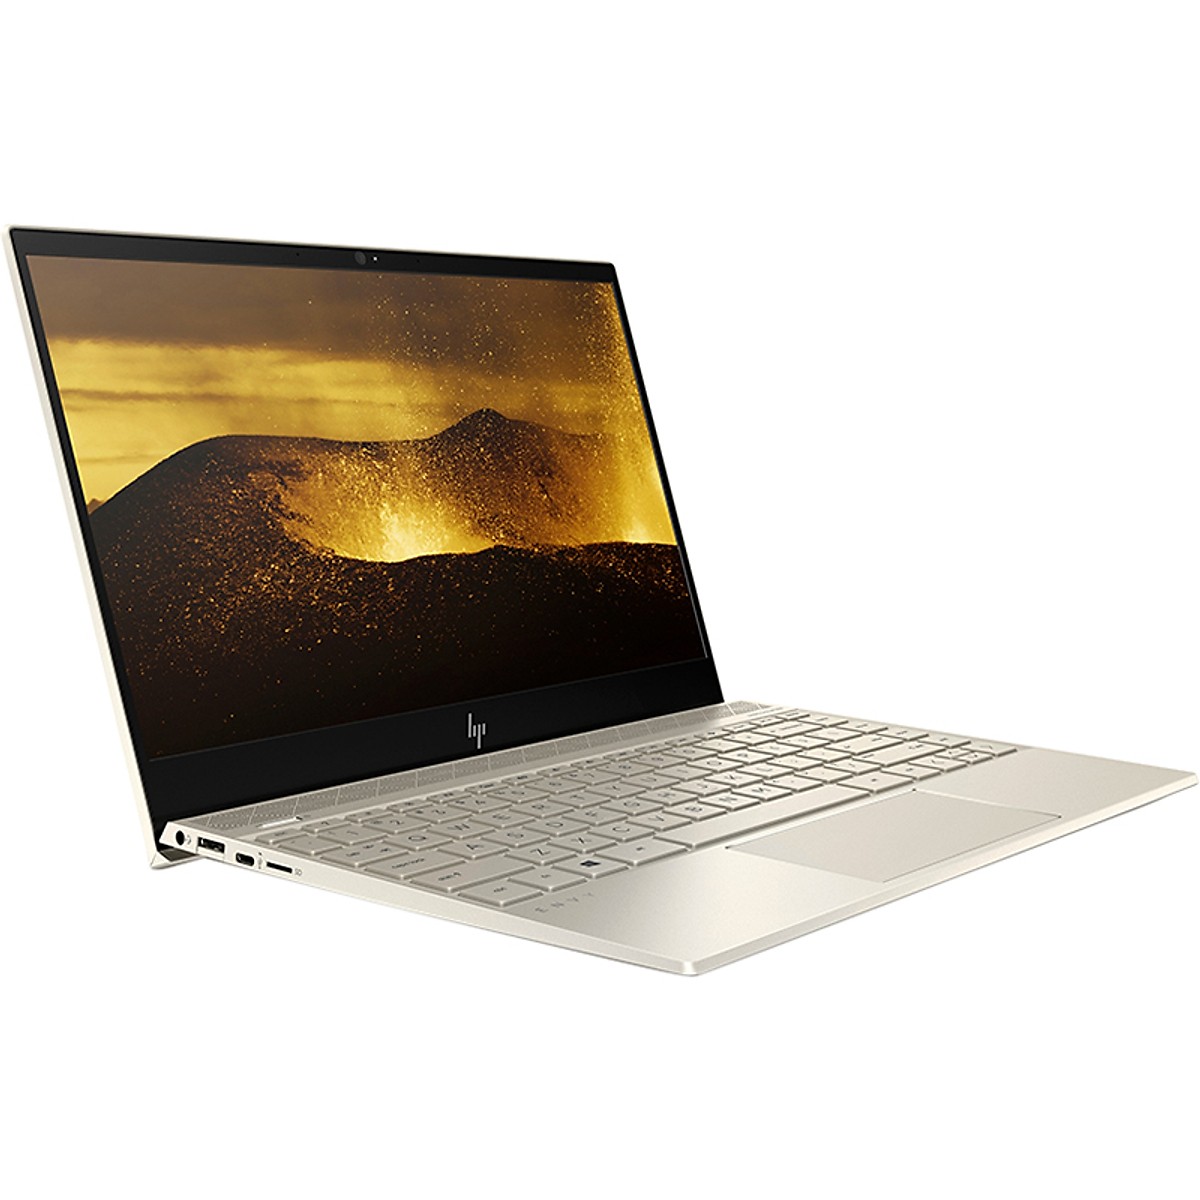 Laptop HP Envy 13-aq1021TU 8QN79PA (i5-10210U/8Gb/256GB SSD/13.3"FHD/VGA ON/Win10/Gold)